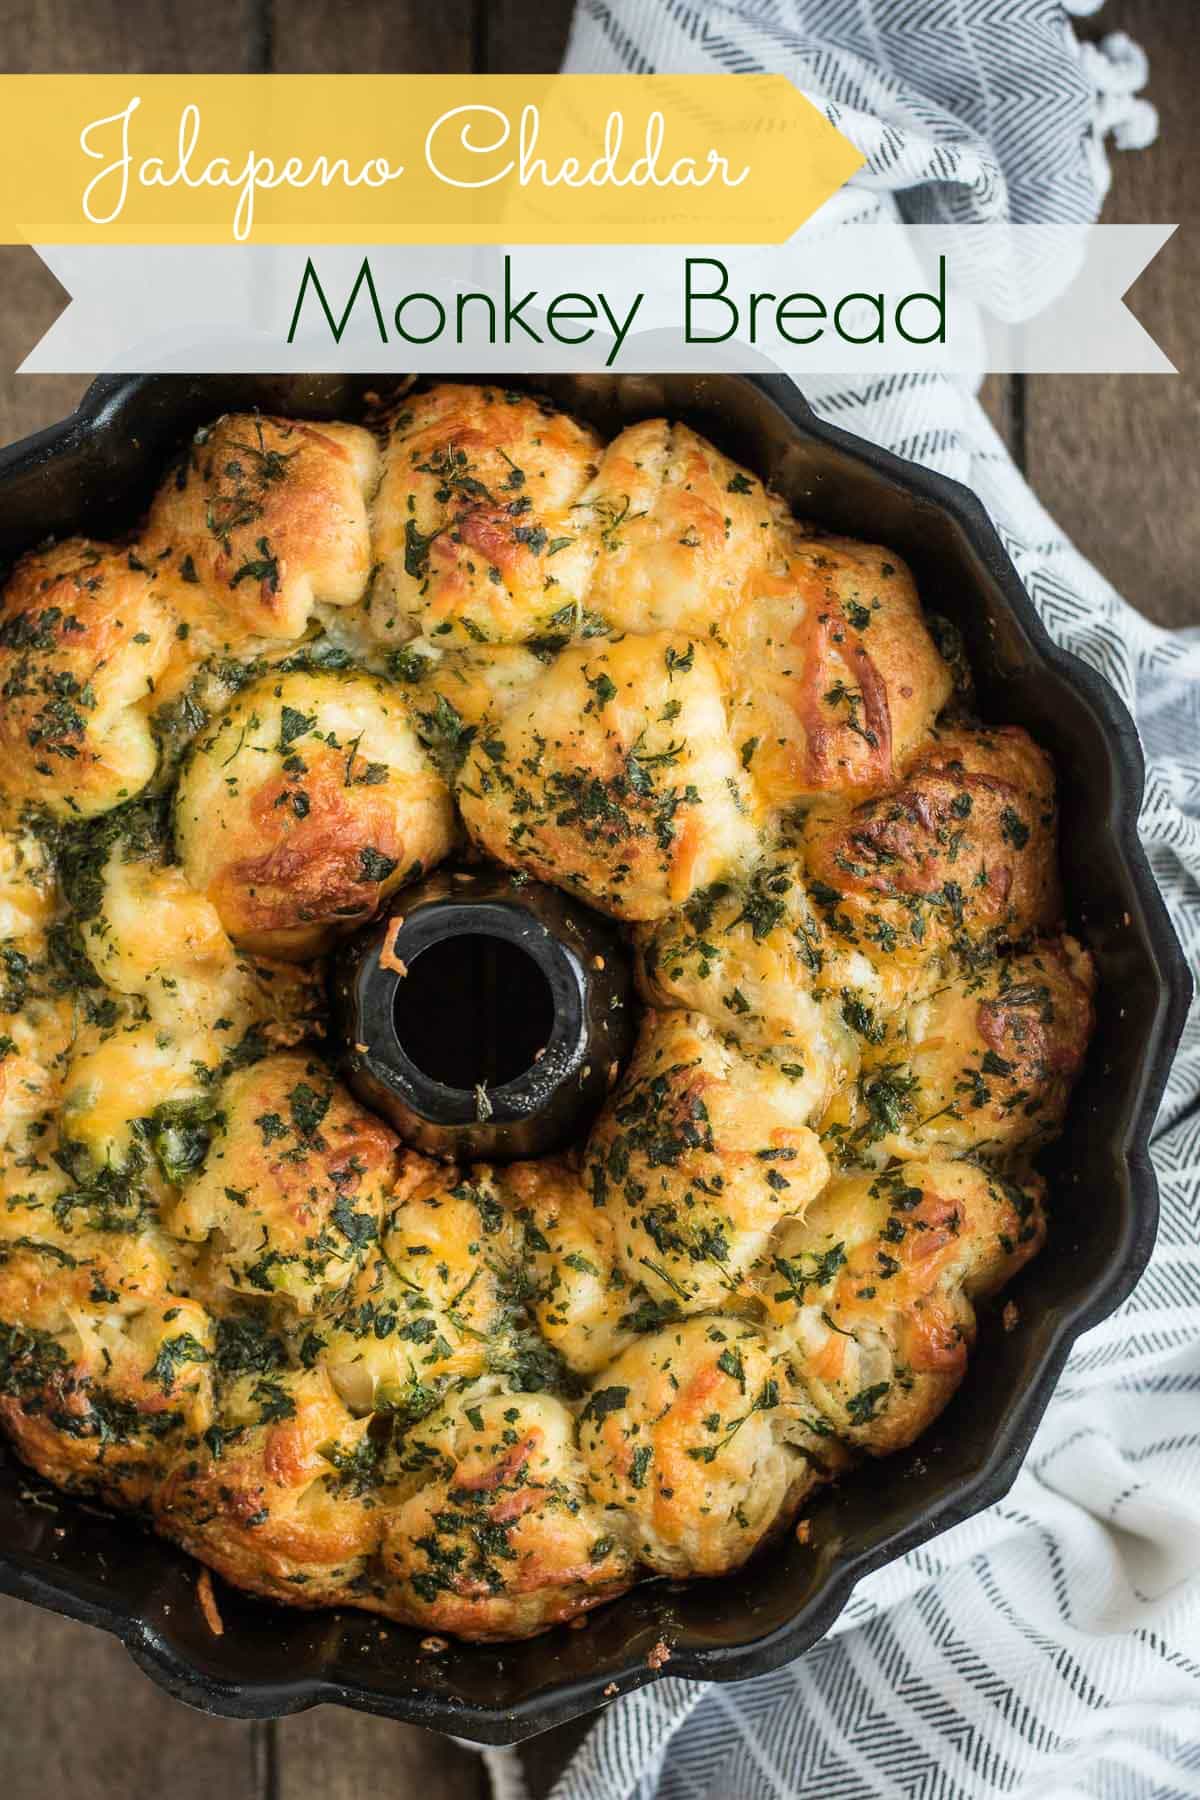 This savory pull apart monkey bread is stuffed with cream cheese dip and loaded with jalapenos and cheddar.